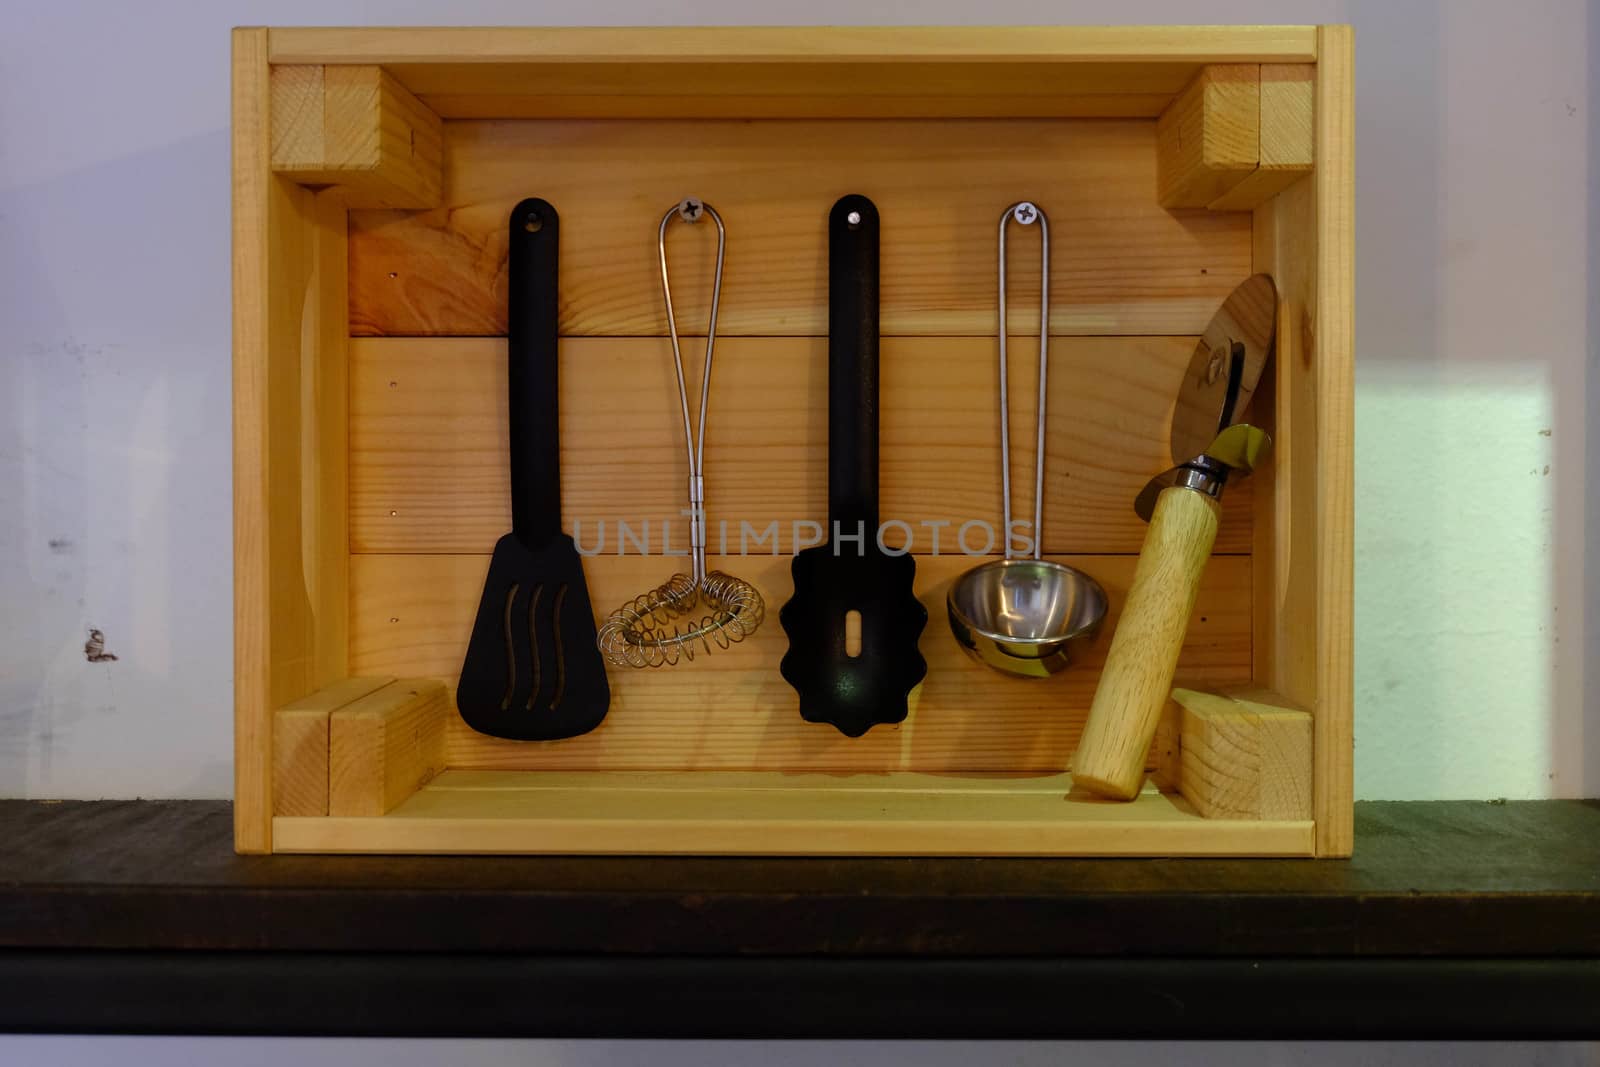 Kitchenware in a wooden box with a rectangular shape.